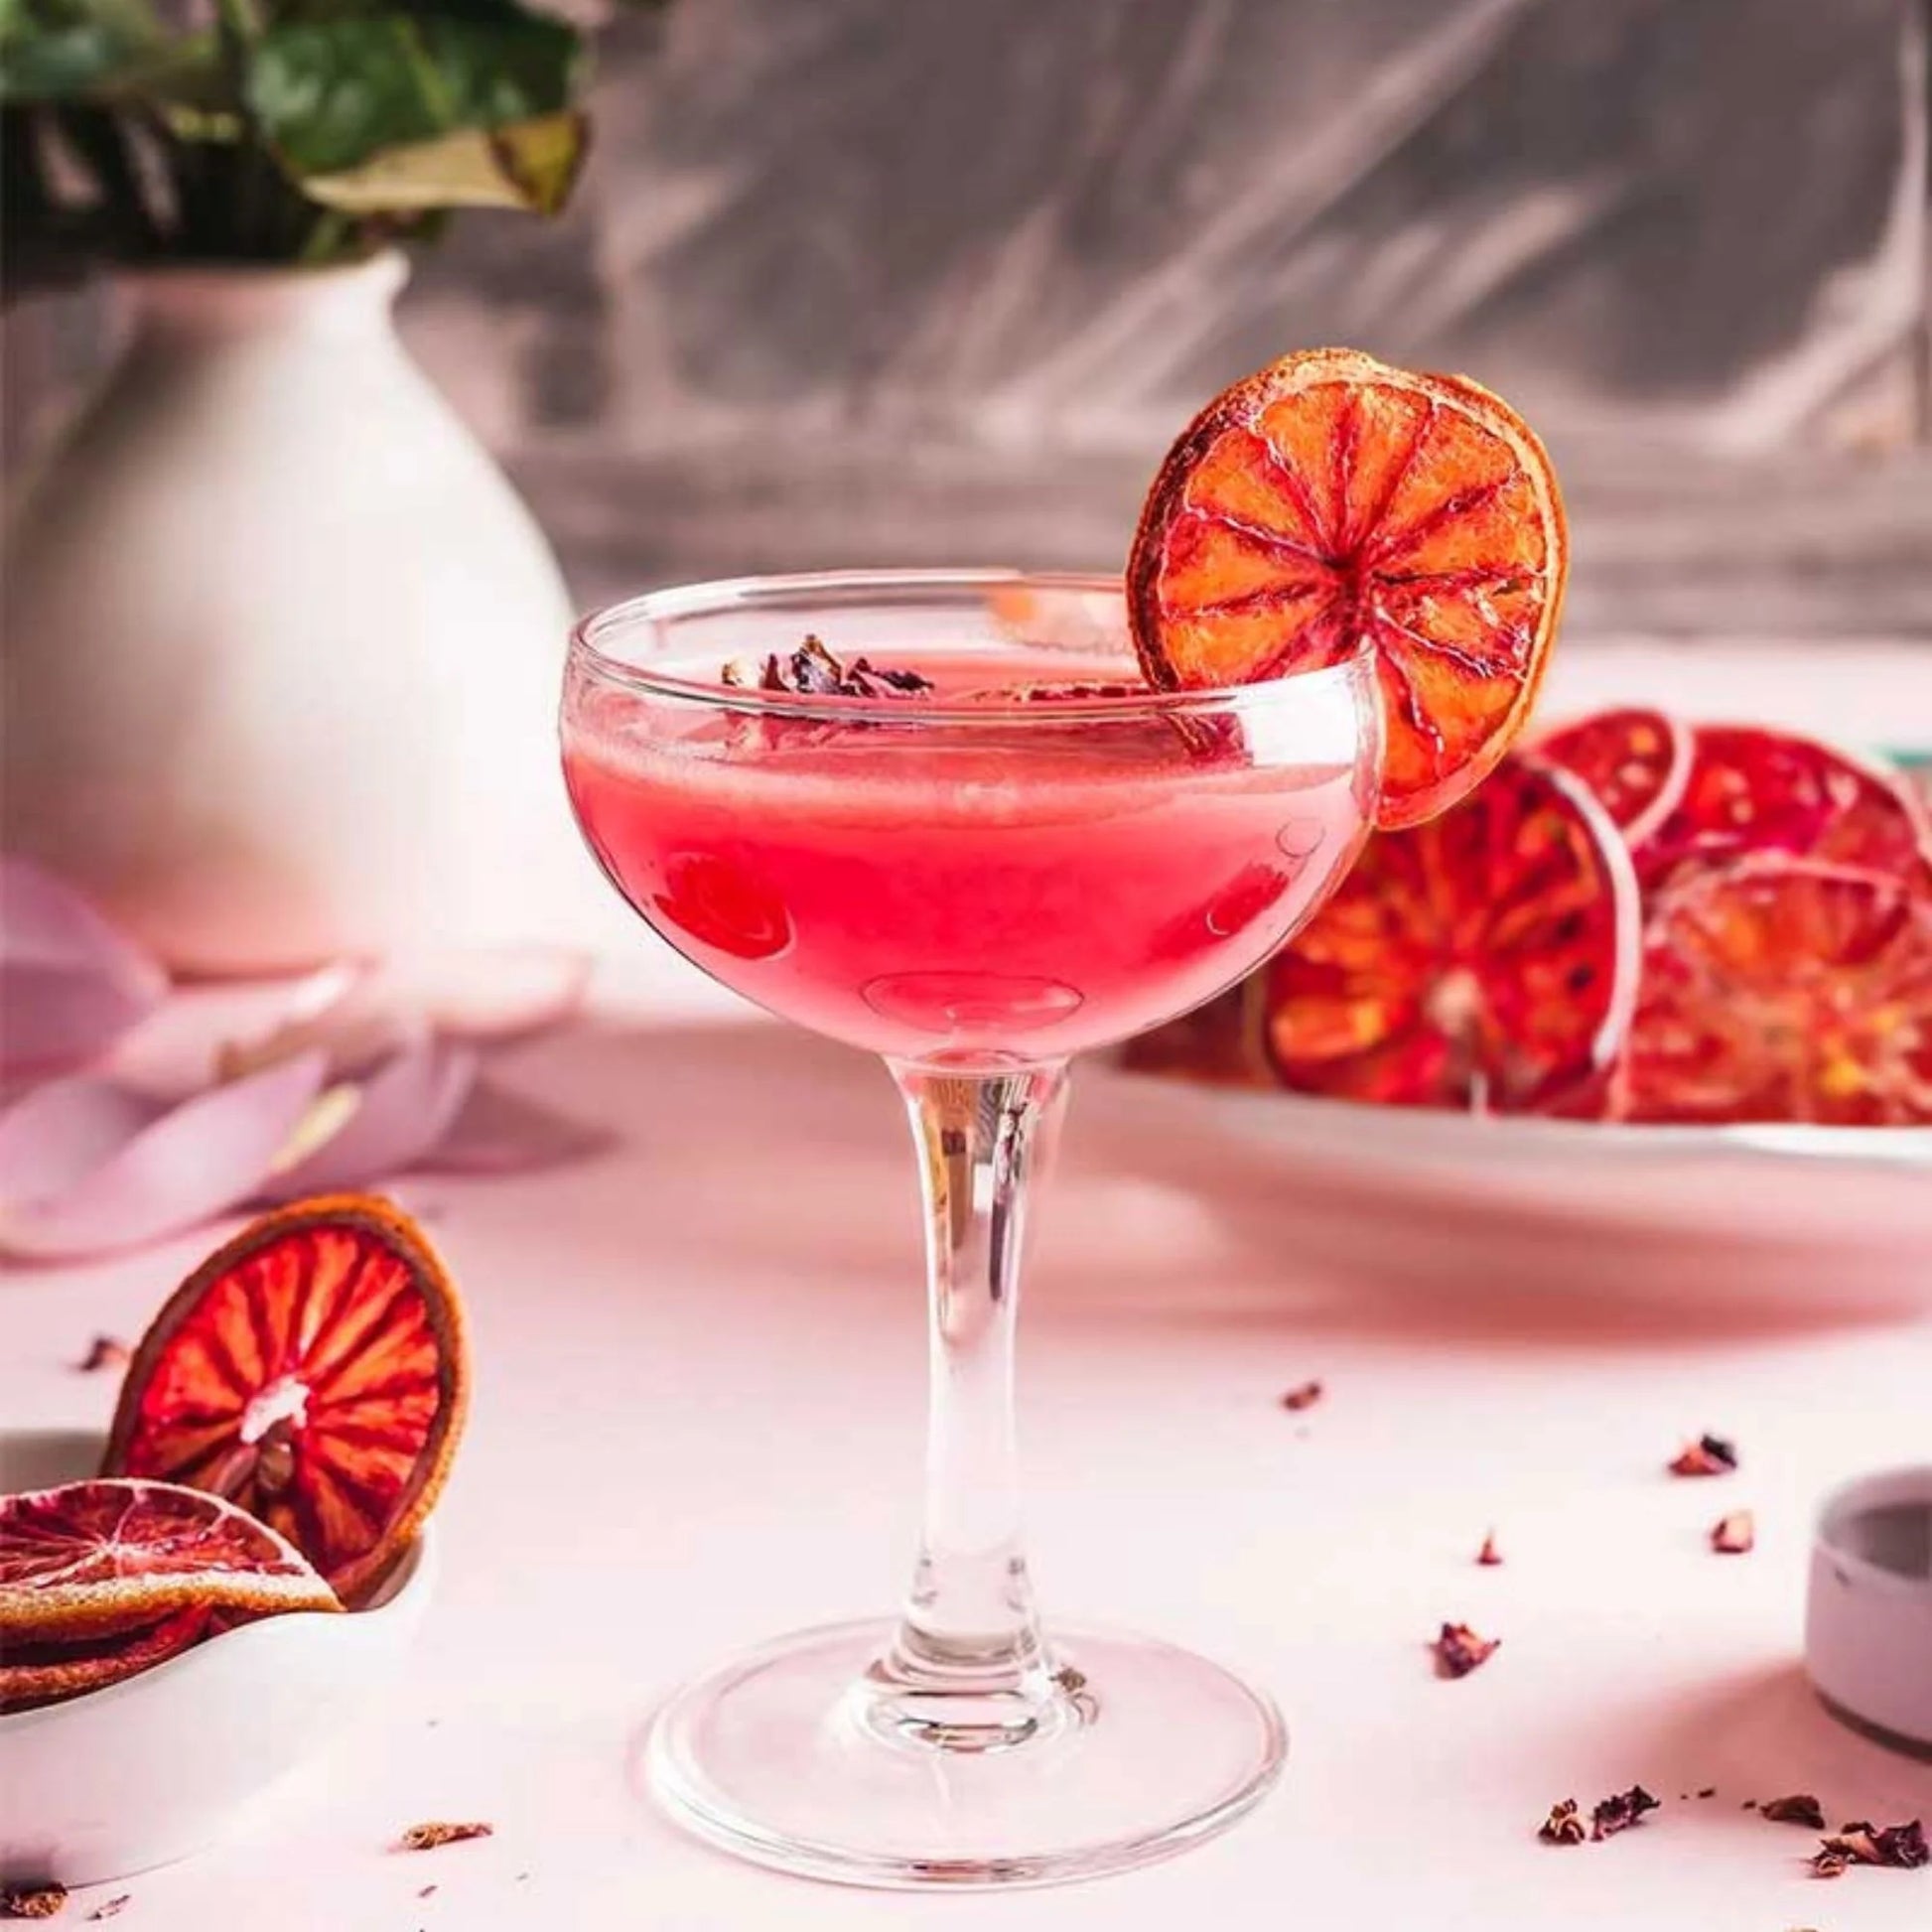 Introducing our newest addition.. Blood Oranges! Our Dried Blood Orange Cocktail Garnishes are made with love and from 100% Australian ingredients. Hand-sliced and dehydrated at our headquarters in the sunny Gold Coast, quality control is our top priority!